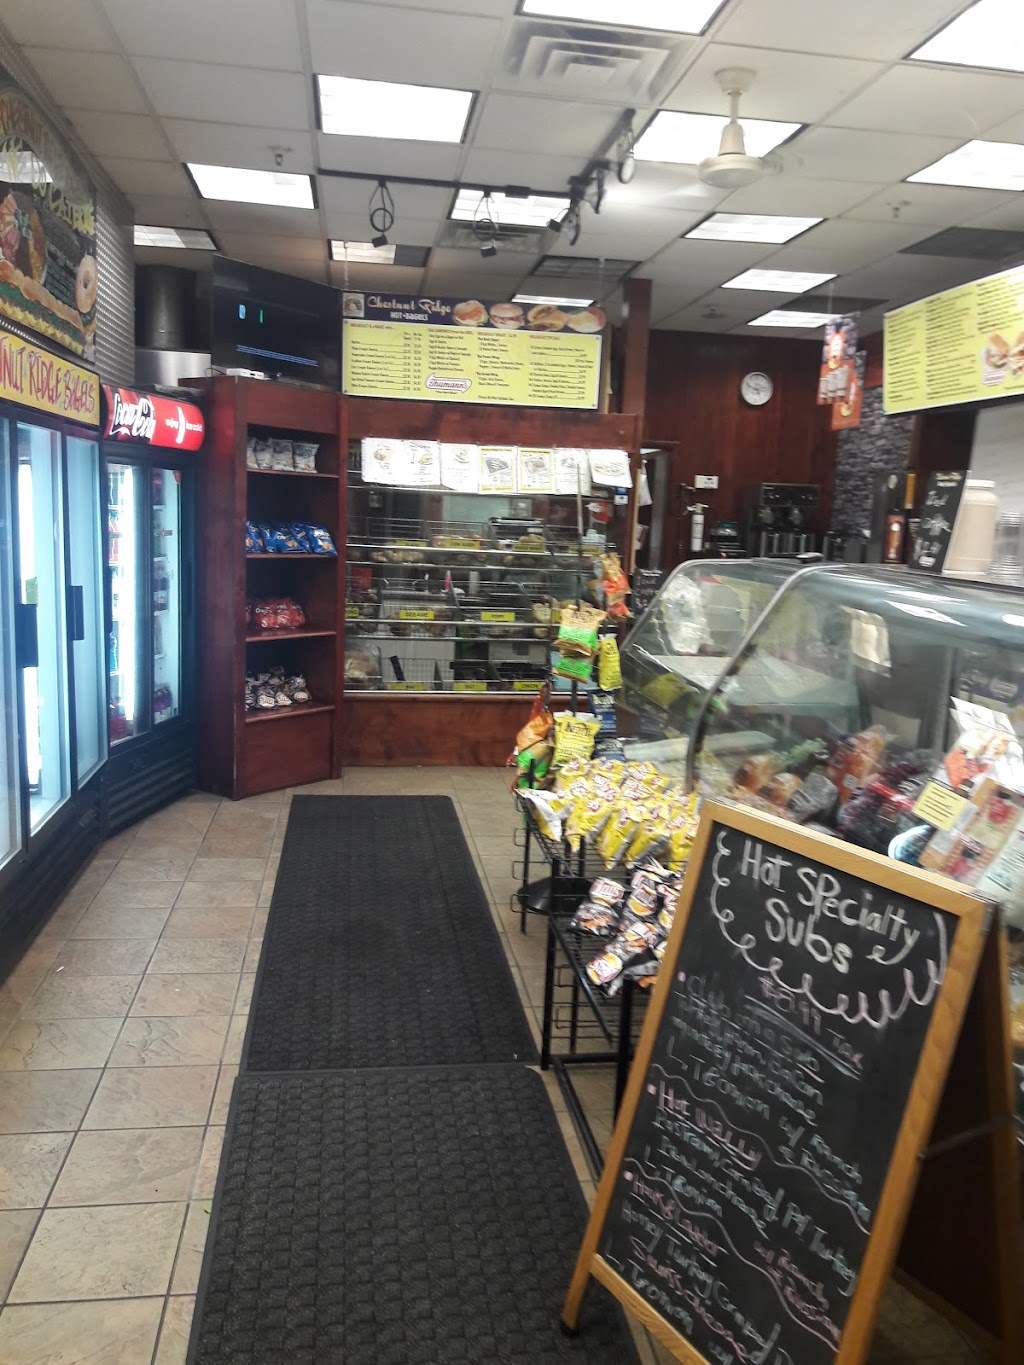 Chestnut Ridge Hot Bagels | Photo 2 of 10 | Address: 6 Red Schoolhouse Rd, Spring Valley, NY 10977, USA | Phone: (845) 573-9000